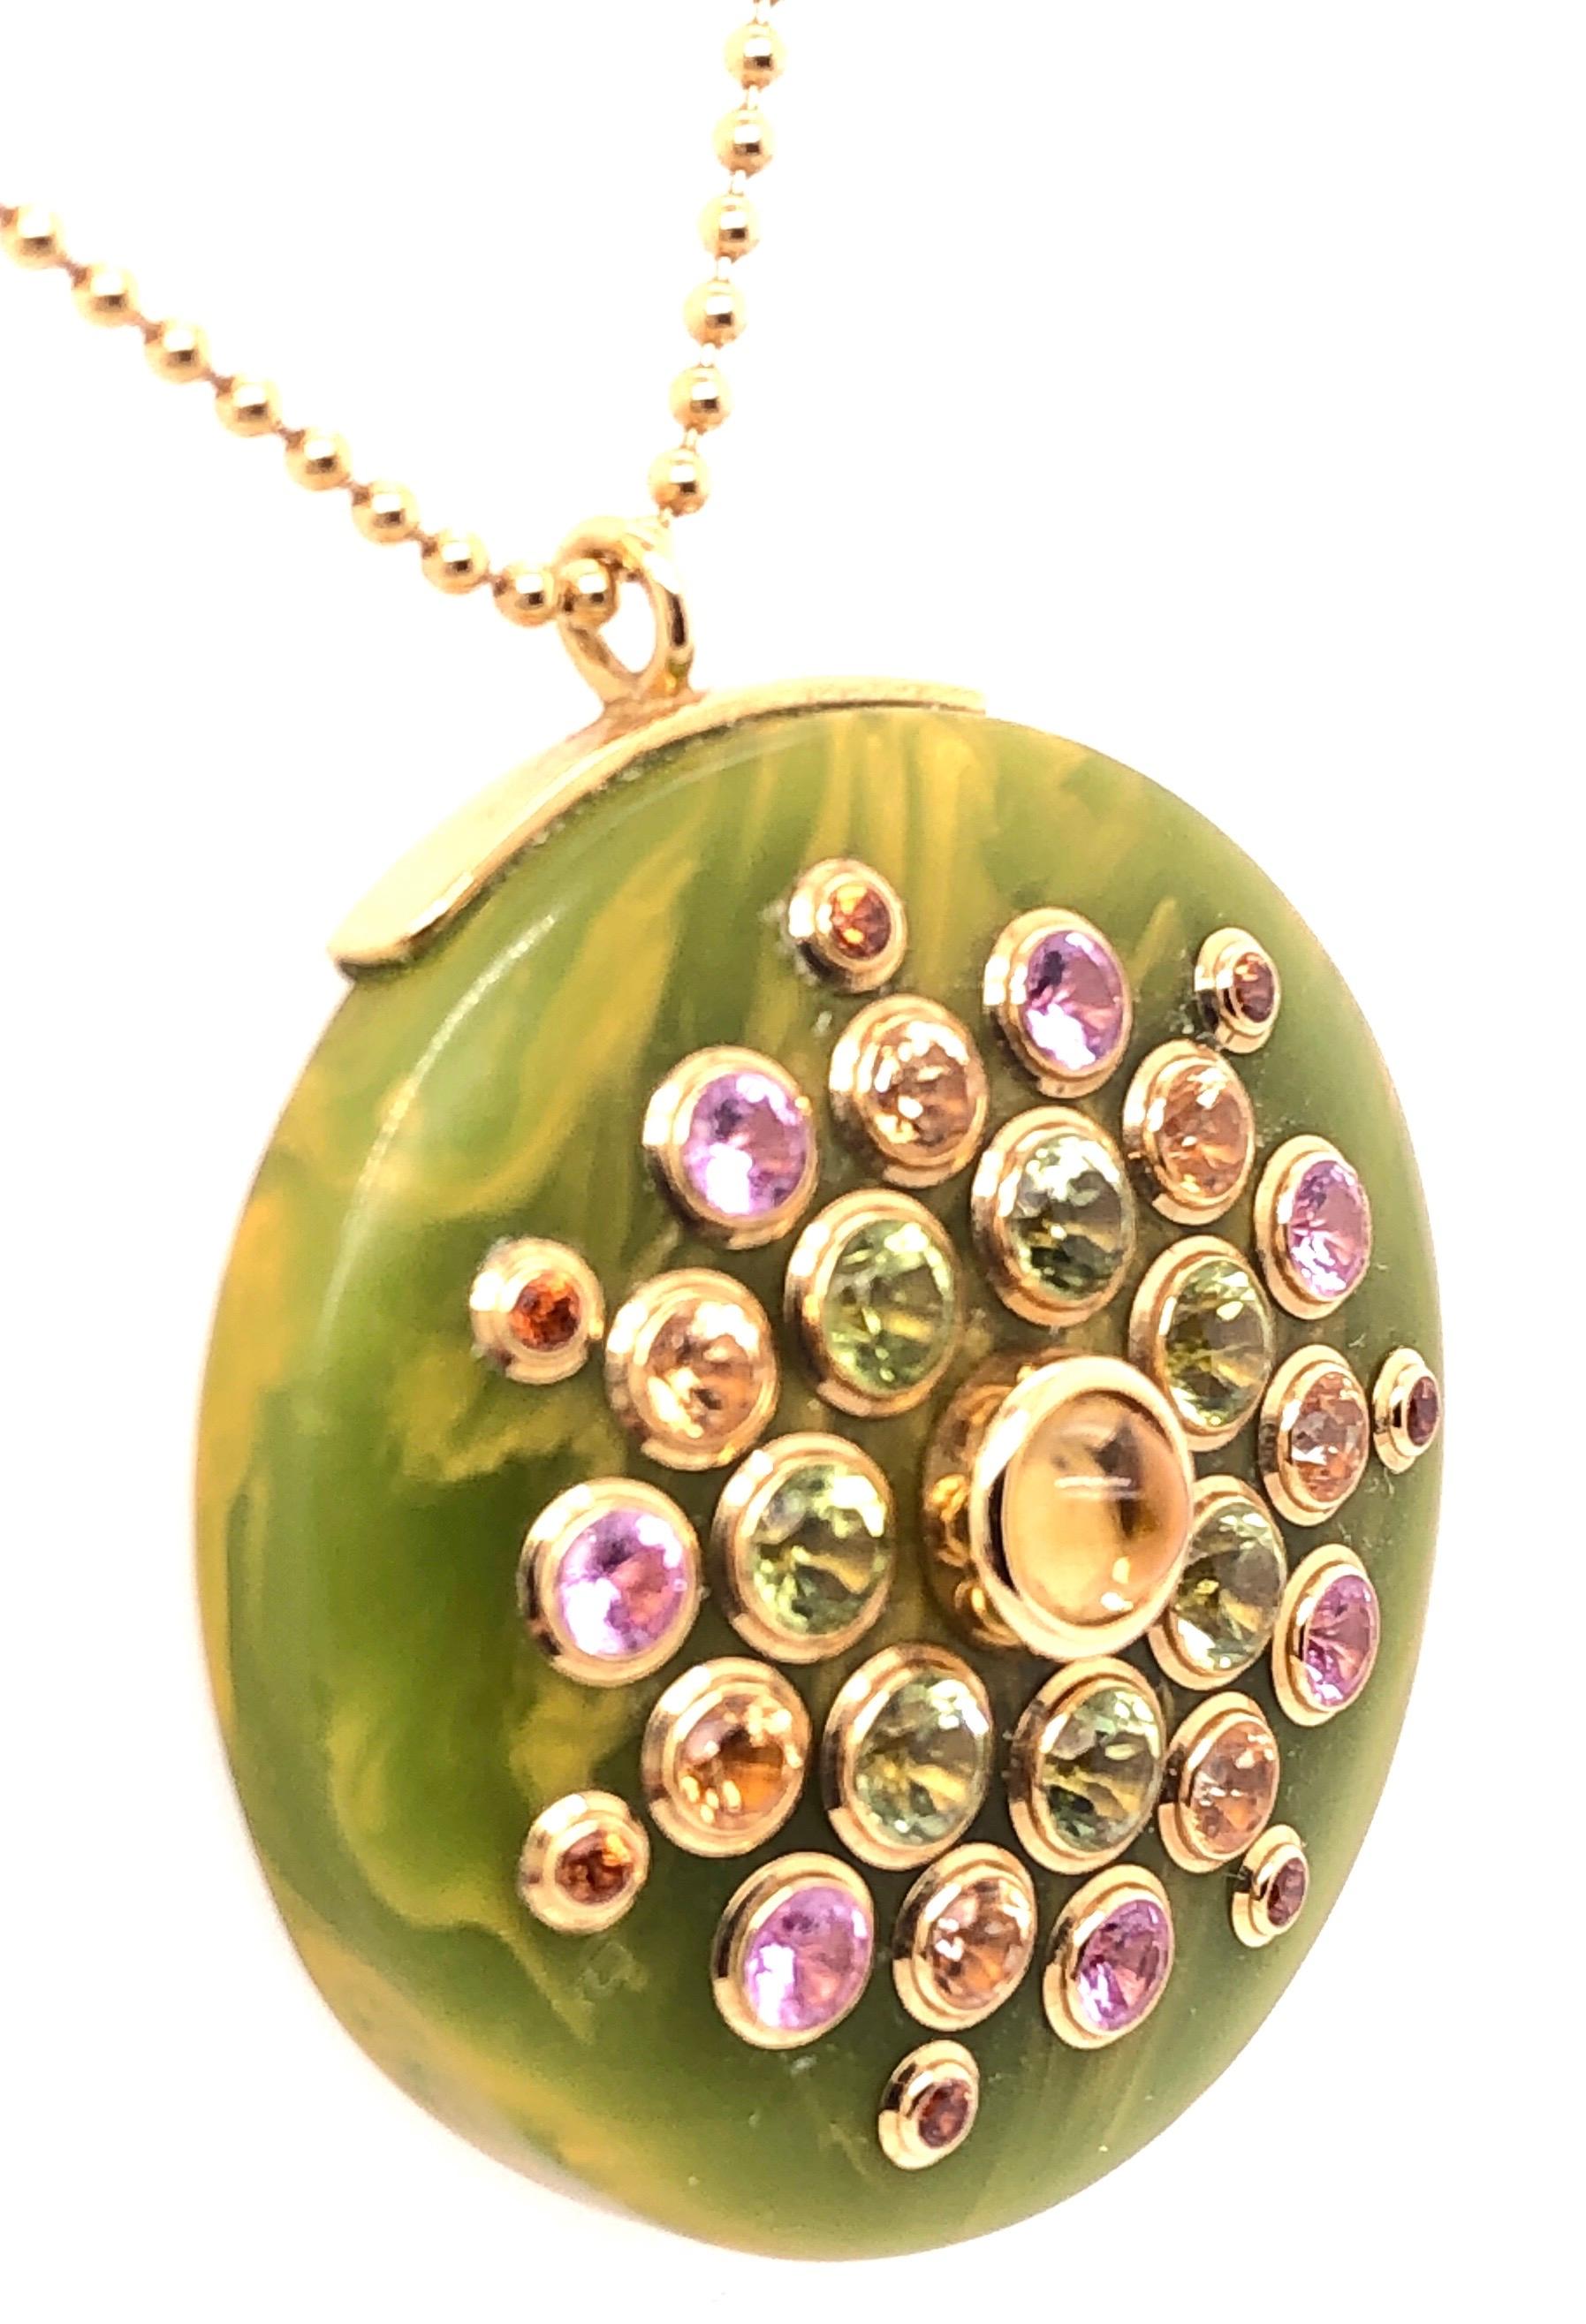 Mark Davis 18Kt Yellow Gold Necklace with Jeweled Pendant
In the hands of Mark Davis, the combination of vintage bakelite, diamonds, gemstones and precious metals yields a singular assortment of collectible contemporary jewelry. Every item is